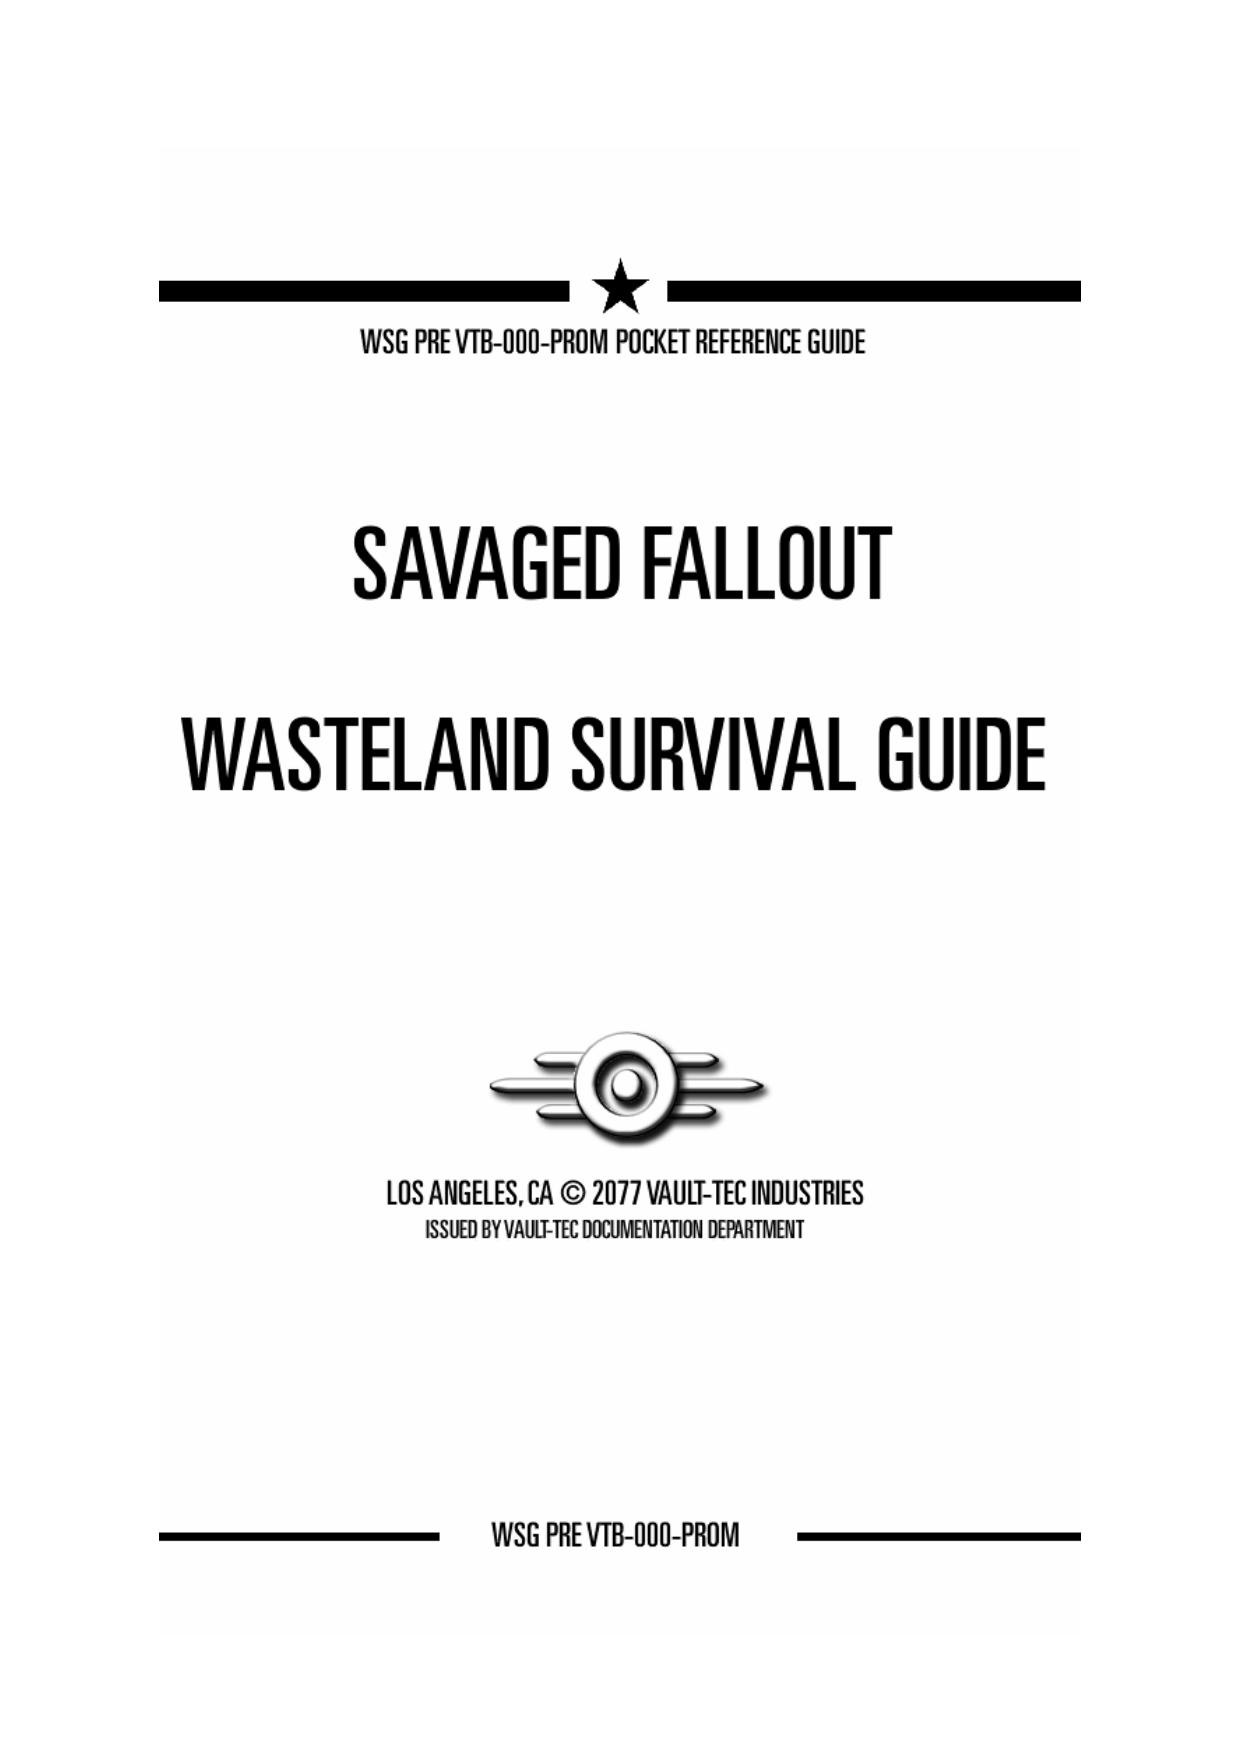 Savaged Fallout Wasteland Survival Guide